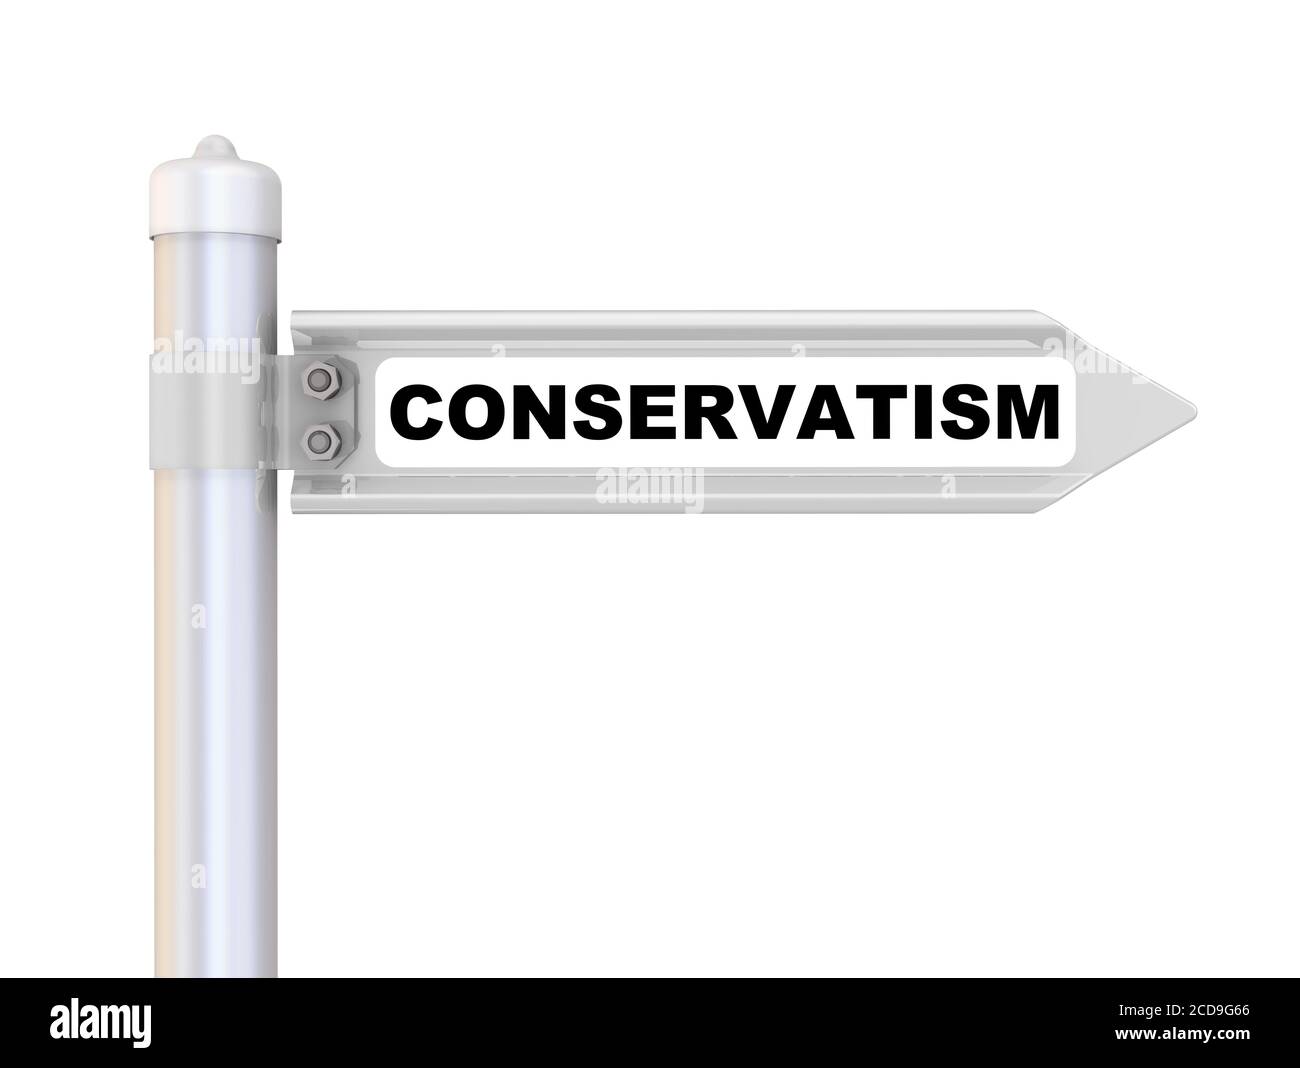 Conservatism. The way mark. Road sign with black word CONSERVATISM. Isolated. 3D illustration Stock Photo